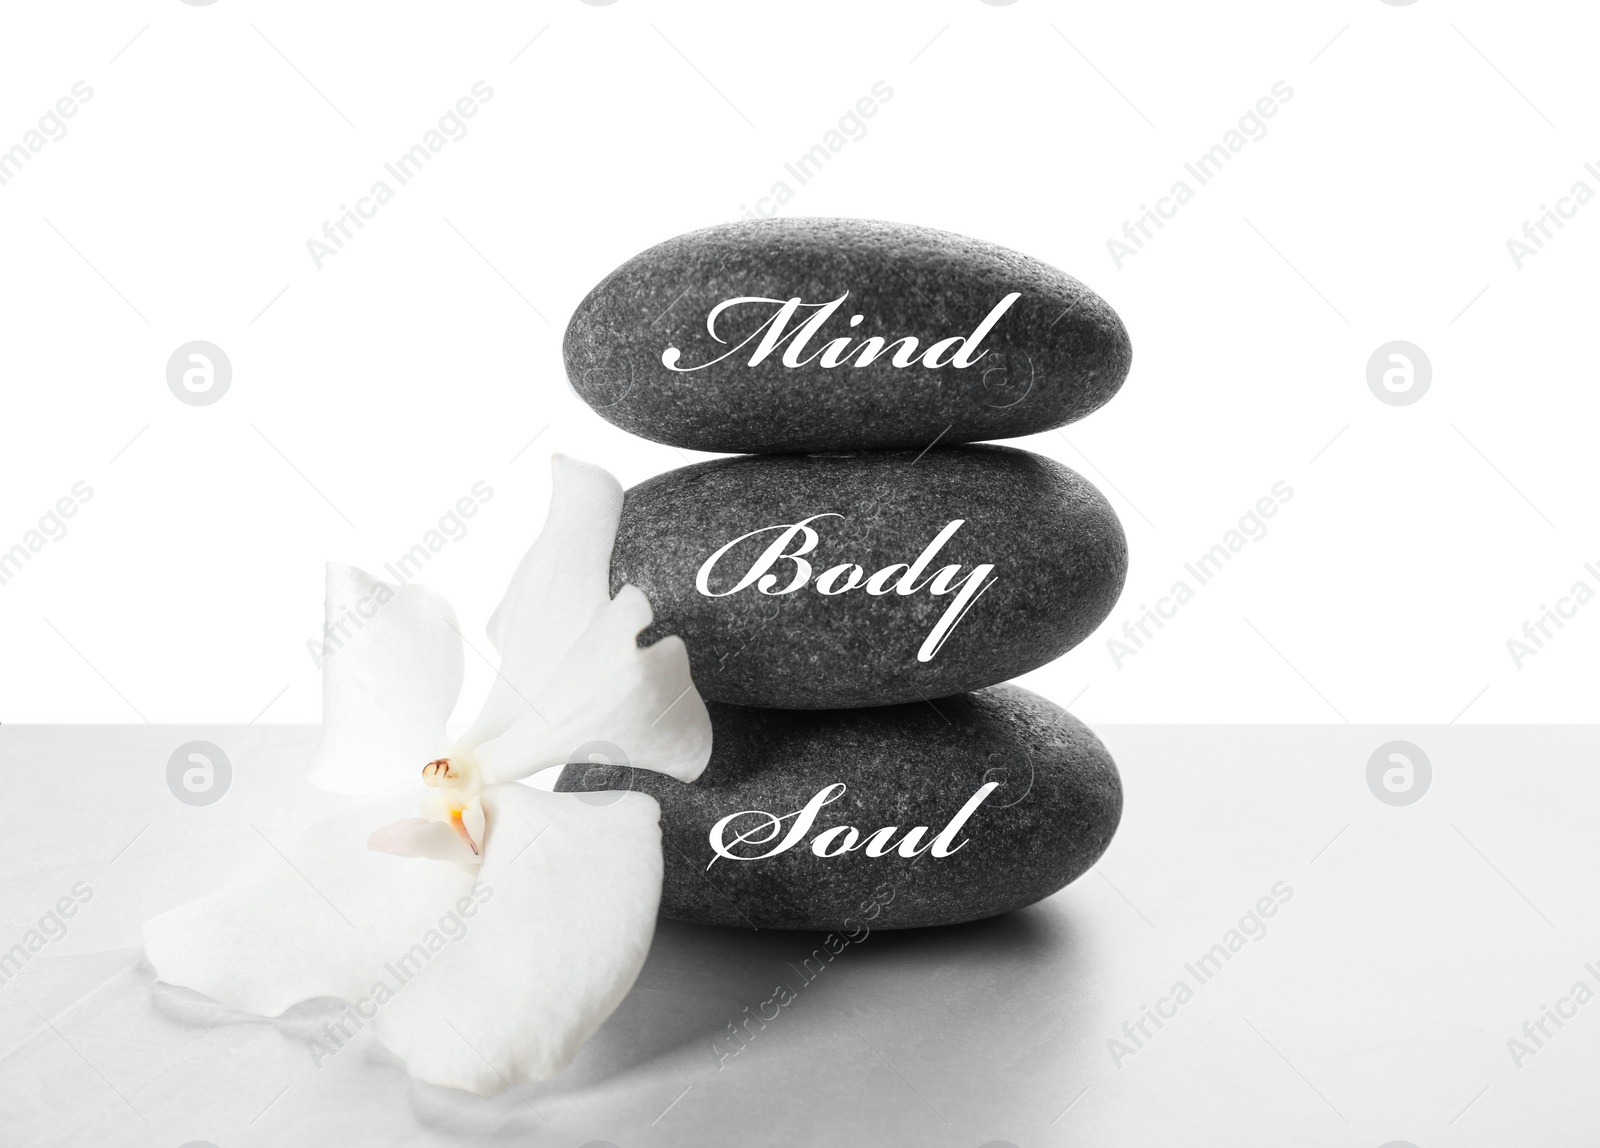 Photo of Stones with words MIND, BODY, SOUL and orchid flower on light background. Zen lifestyle